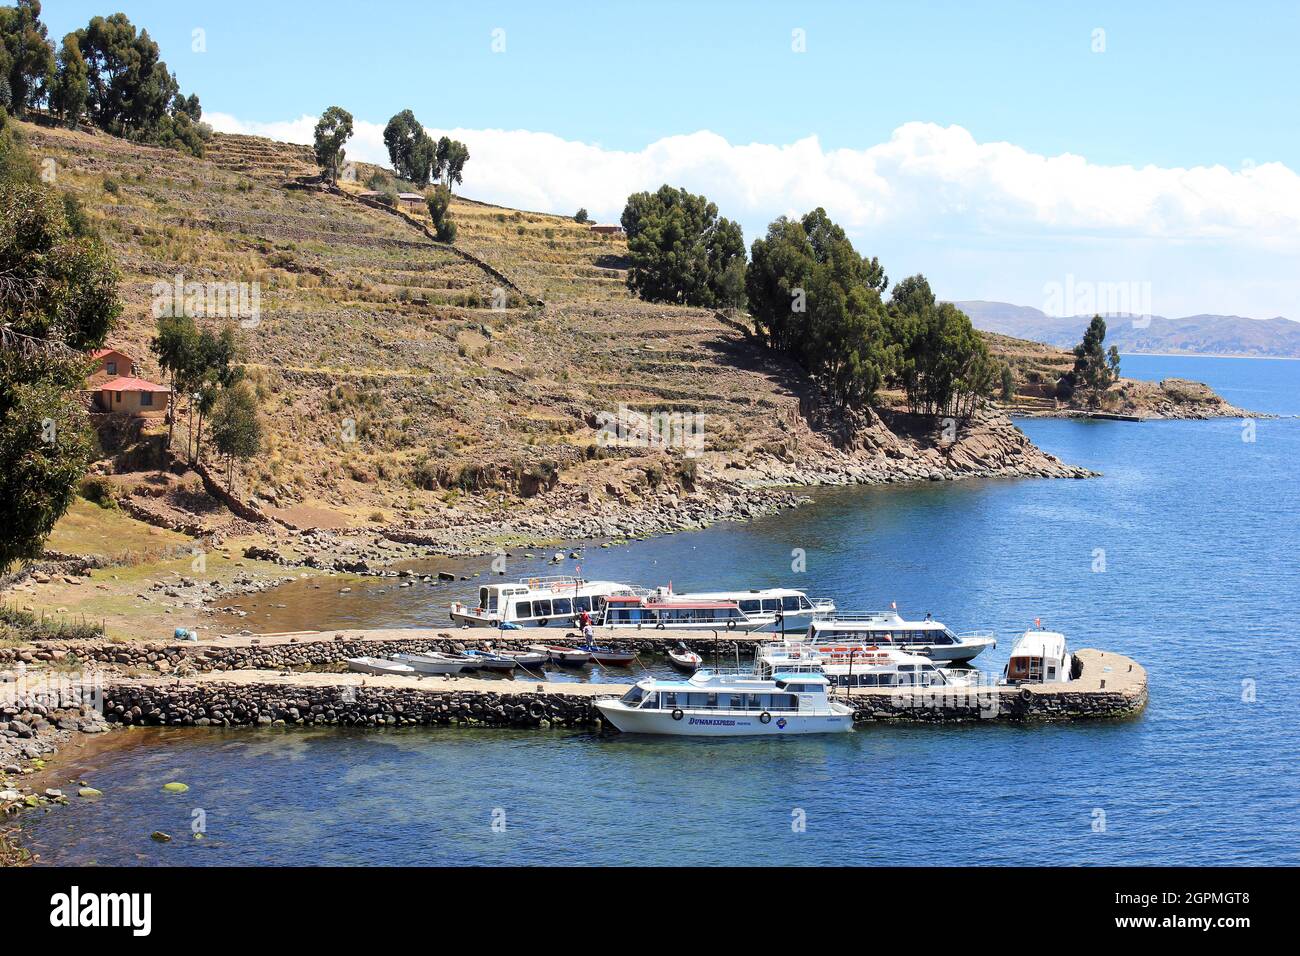 Cruise Boats Moored On Stone Jetty At Taquile Island, Peru Stock Photo